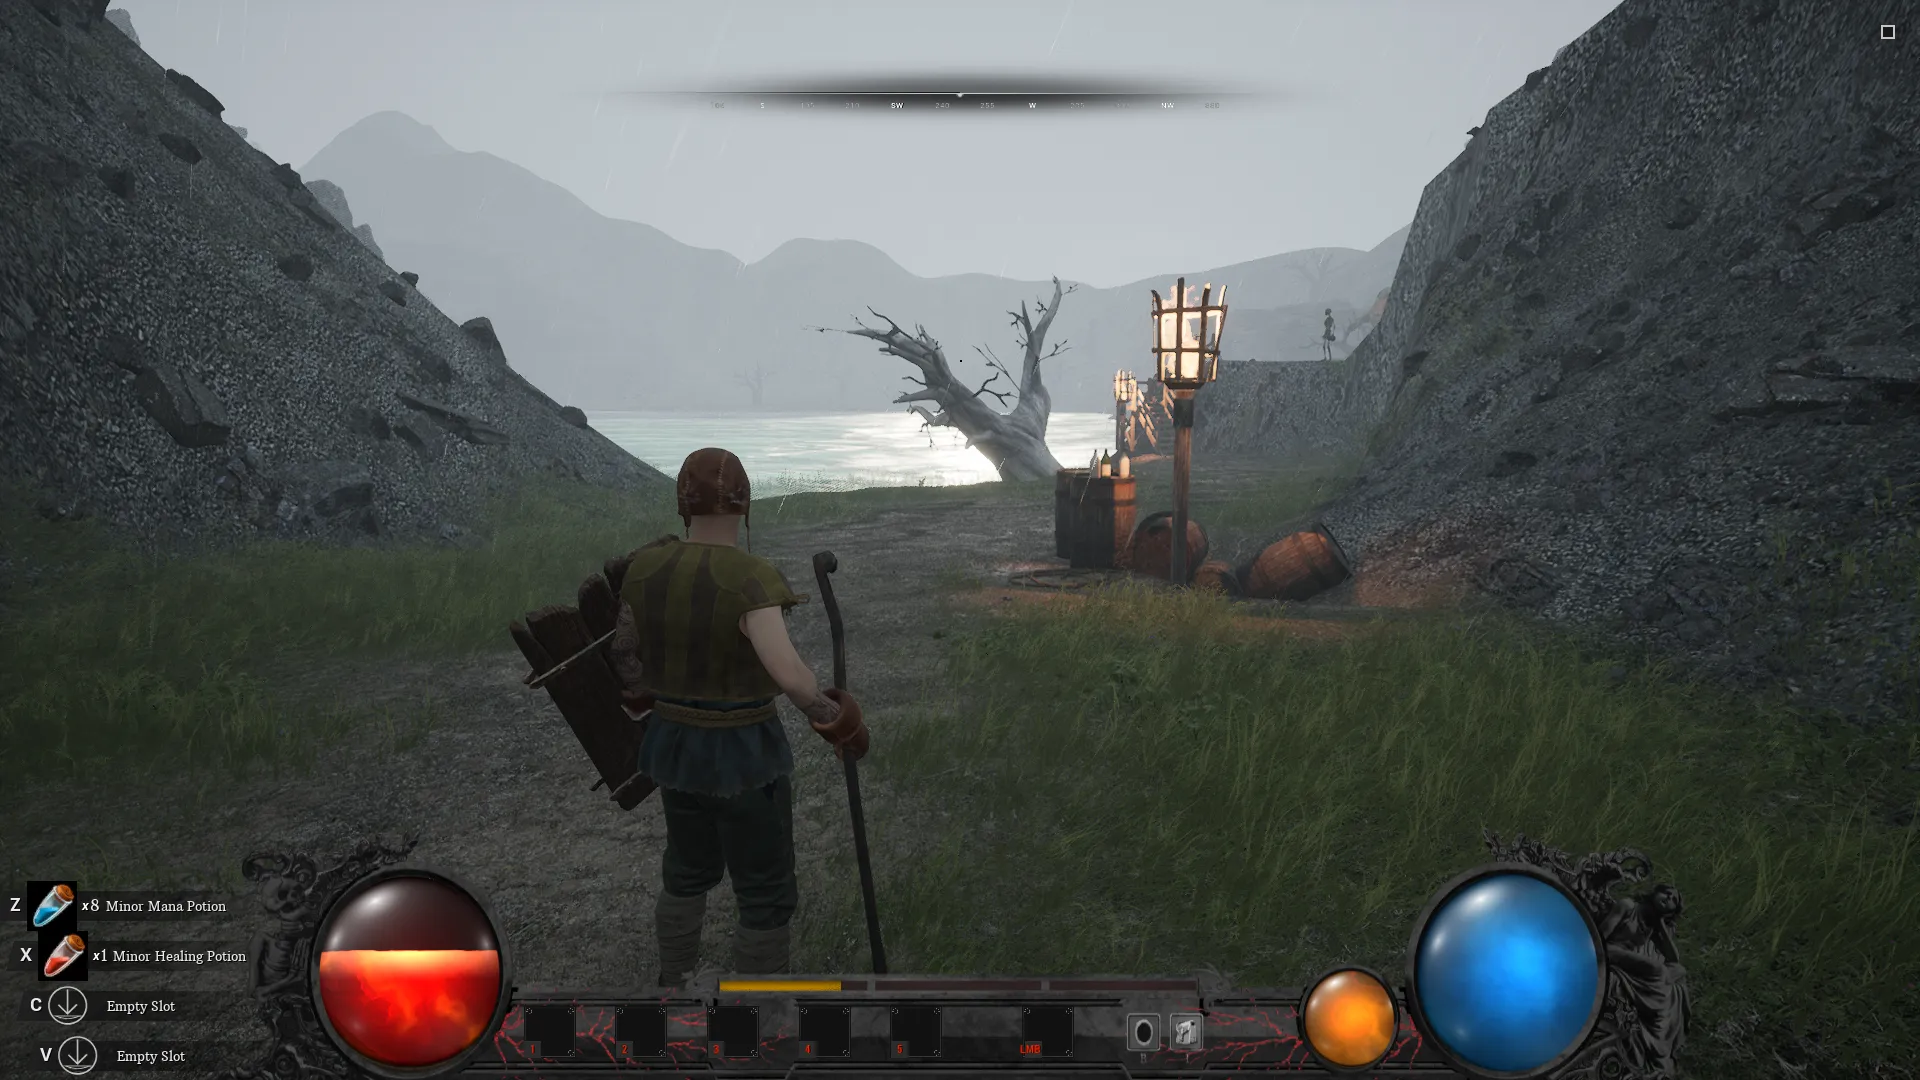 Screenshot of Blight's Wrath gameplay, showing Diablo-style HUD and a third-person POV of a serf in medieval era with large staff and wooden shield standing before a desaturated natural landscape.